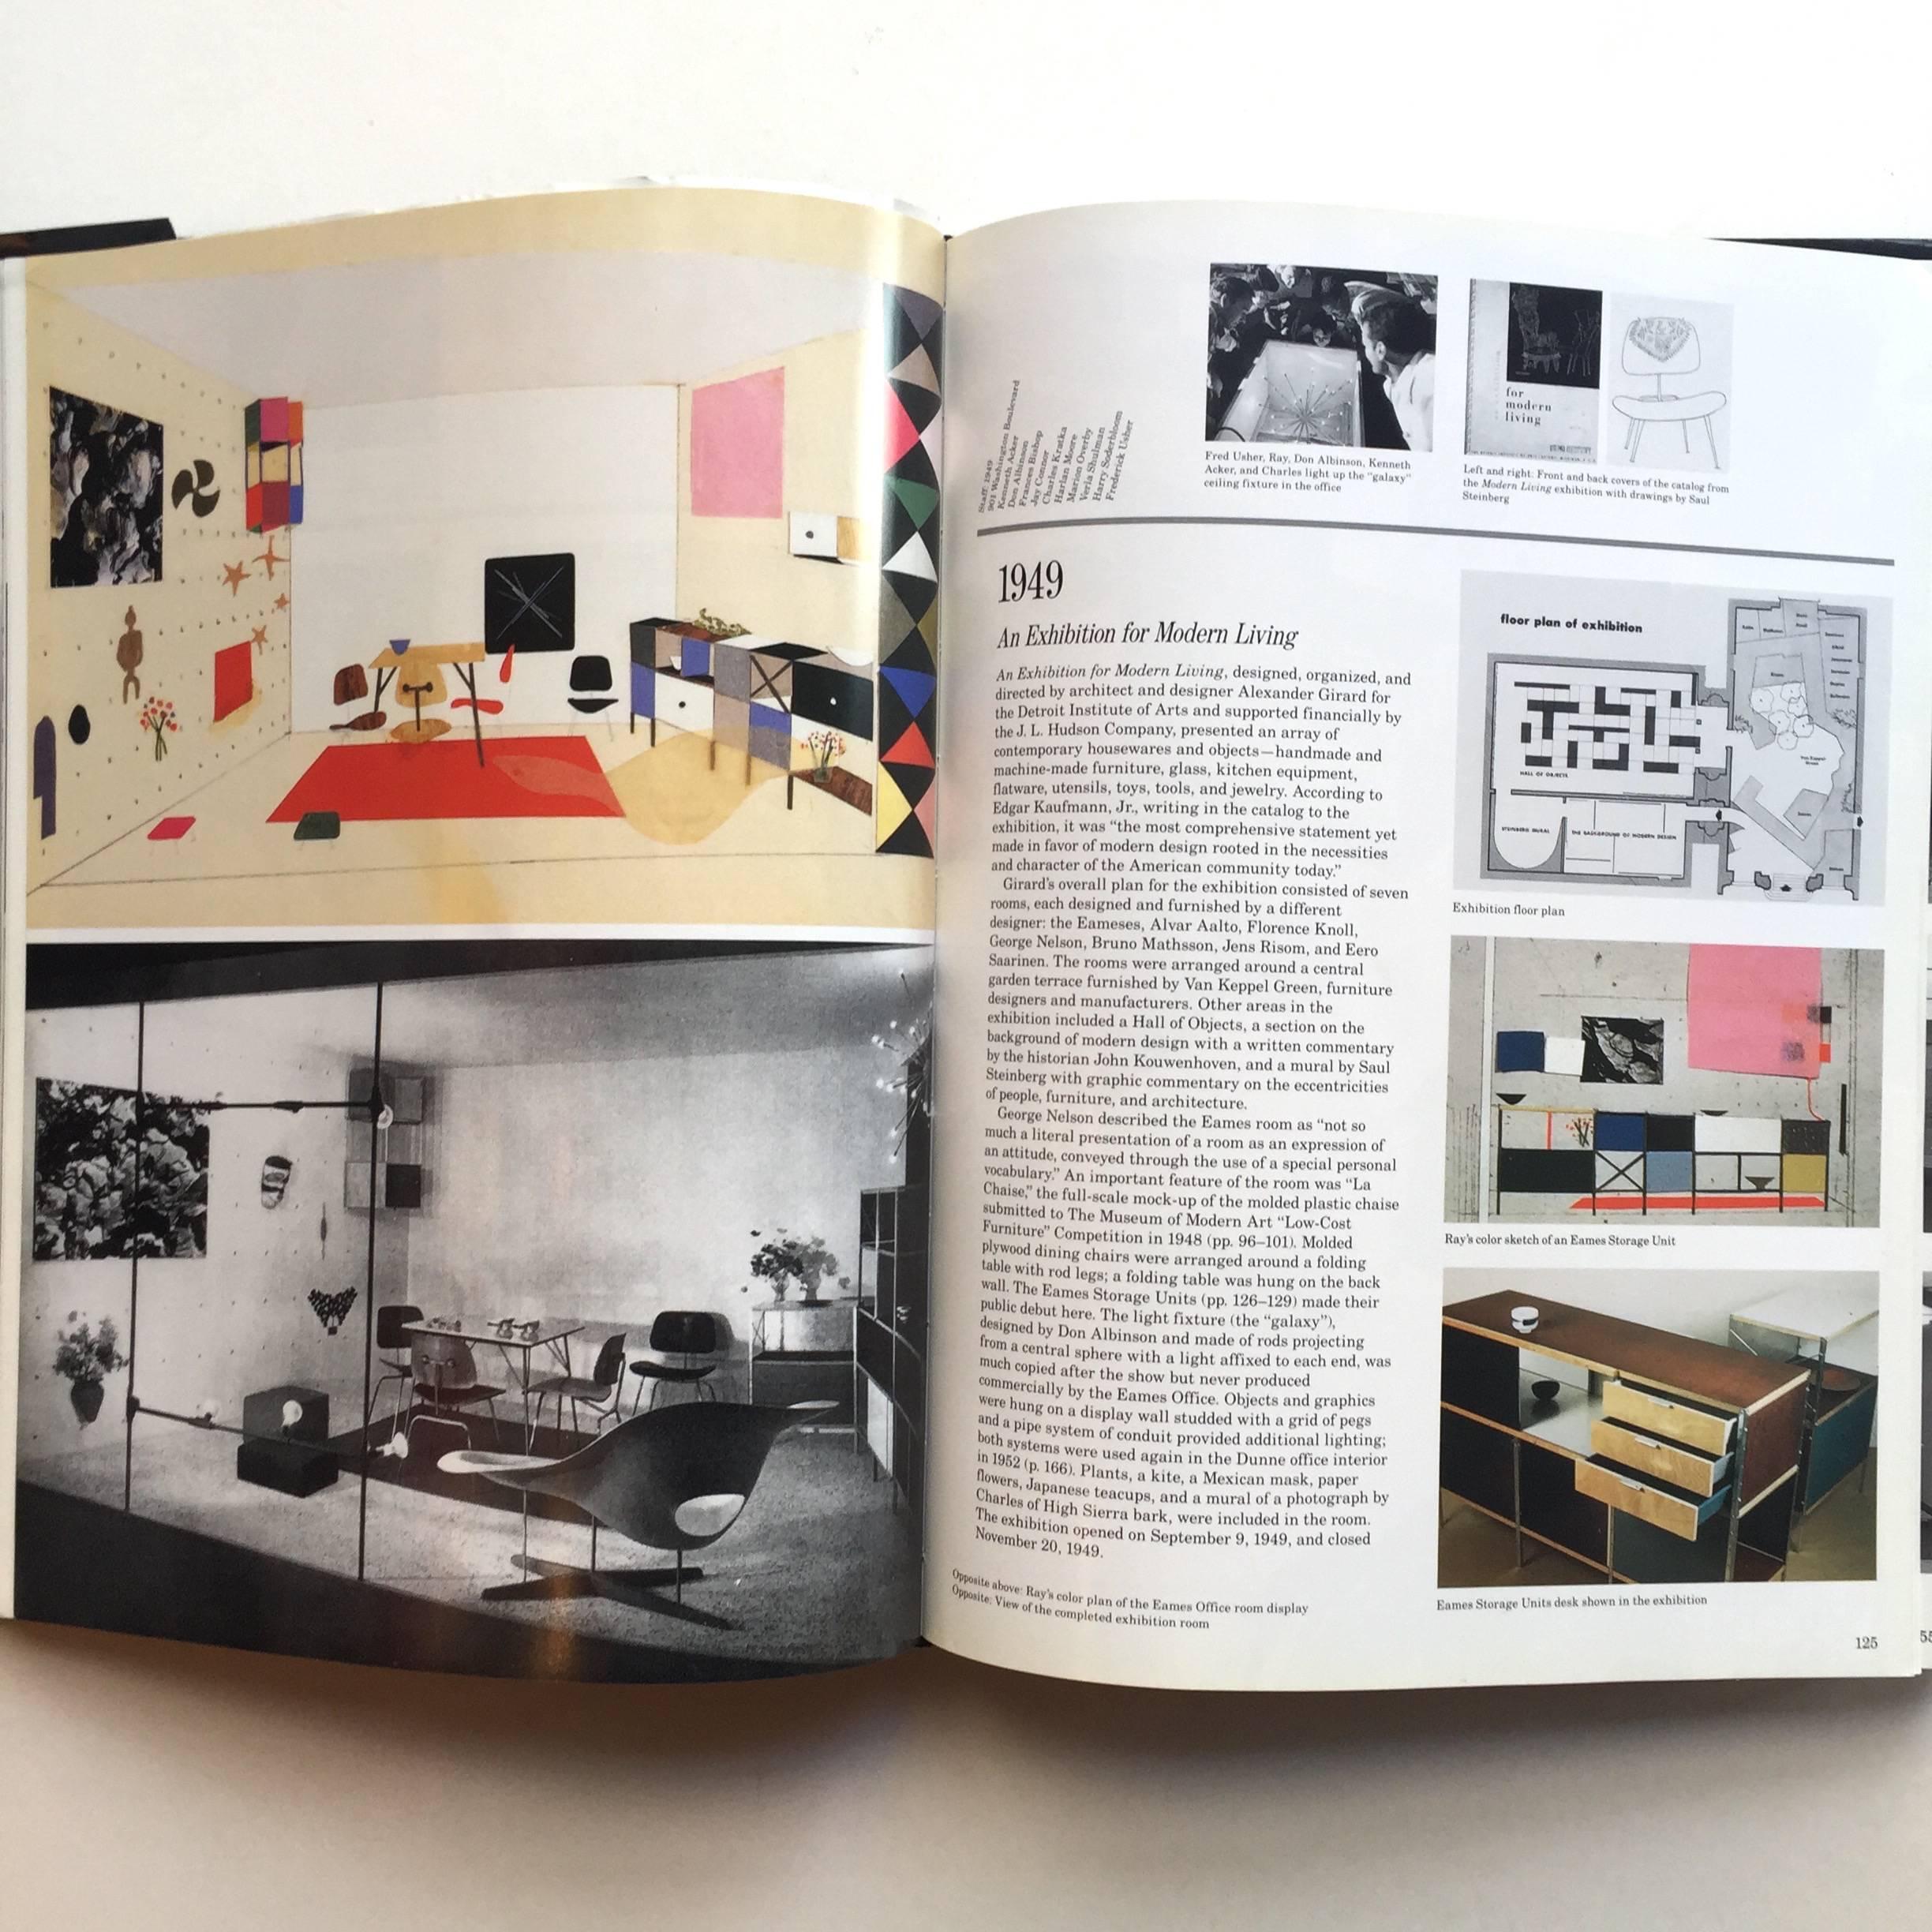 First edition, third printing, published by Harry N. Abrams, 1994. Text by John & Marilyn Neuhart and Ray Eames.

From a partnership that started with modest beginnings exploring the uses of heat-formed plywood for furniture and medical apparatus,